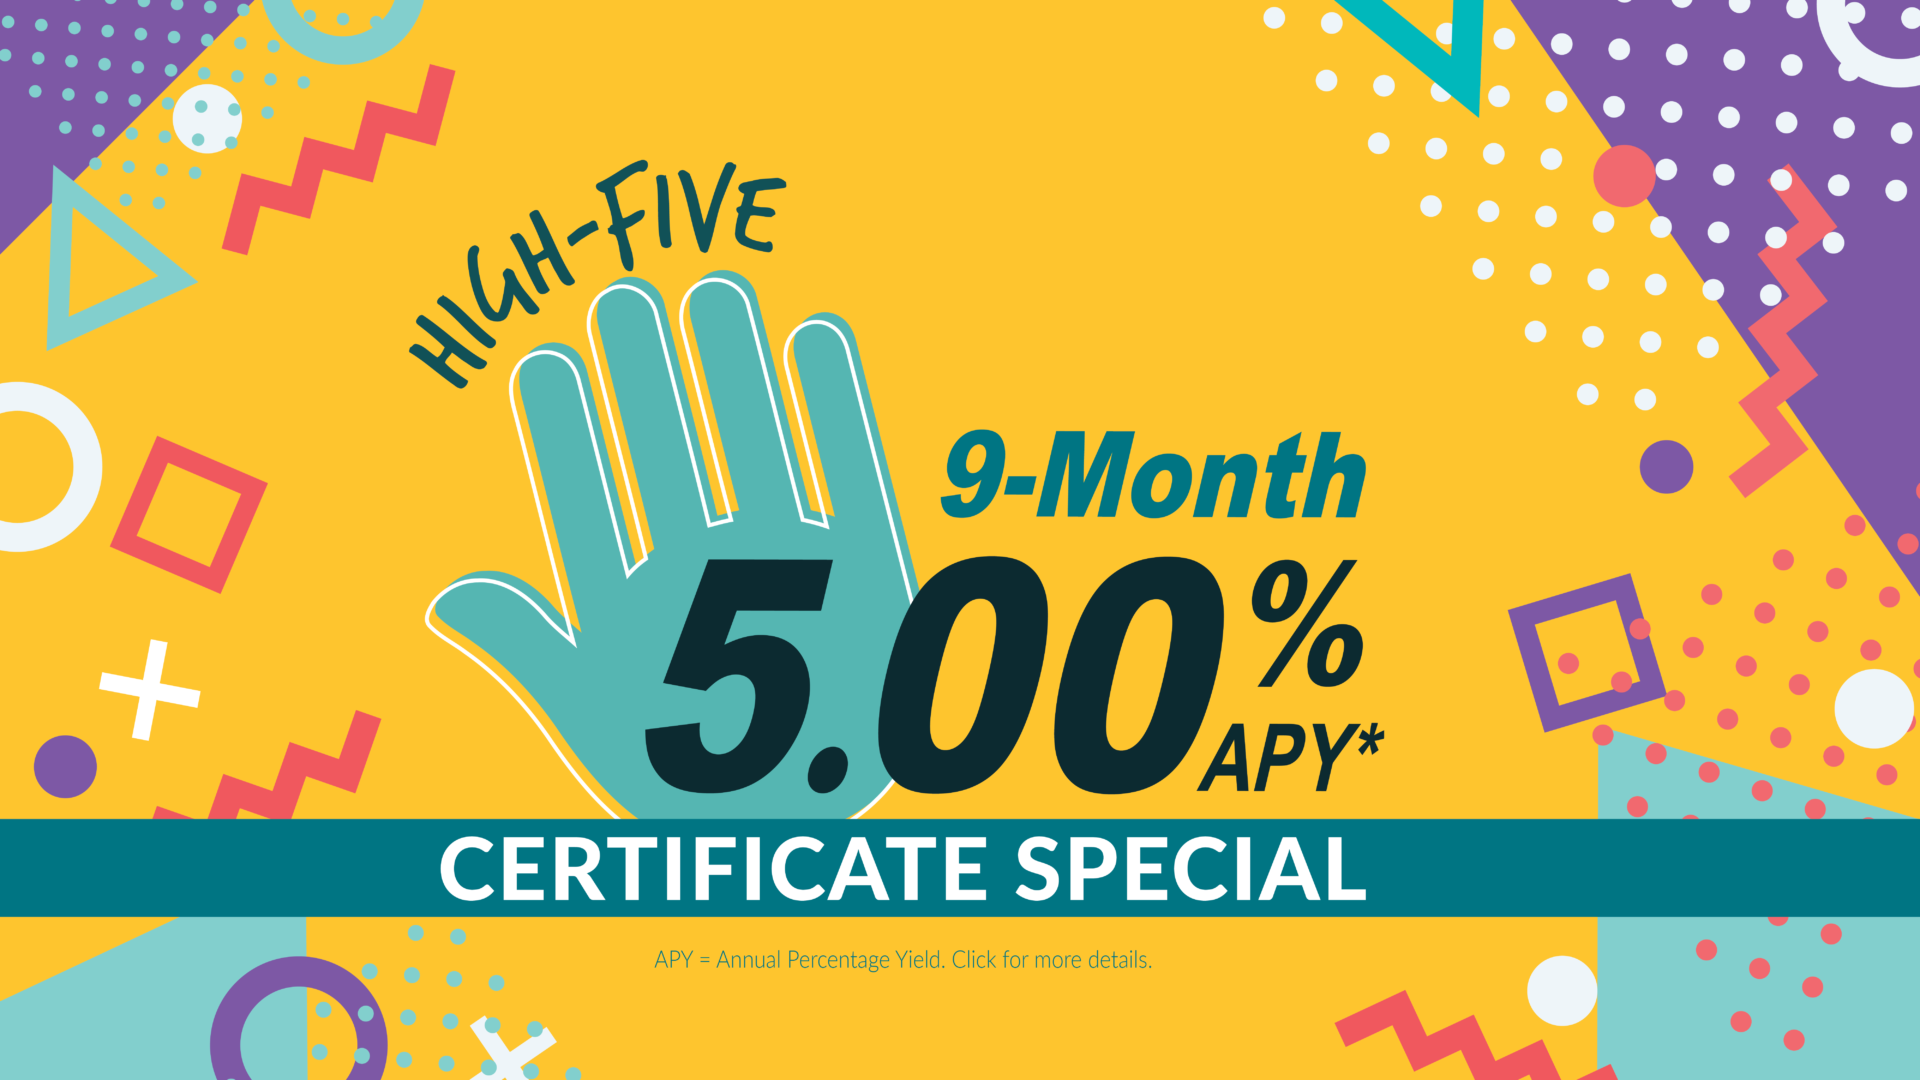 High Five Certificate of Deposit Special. Earn 5.00% Annual Percentage Rate on a 9 month term cd.